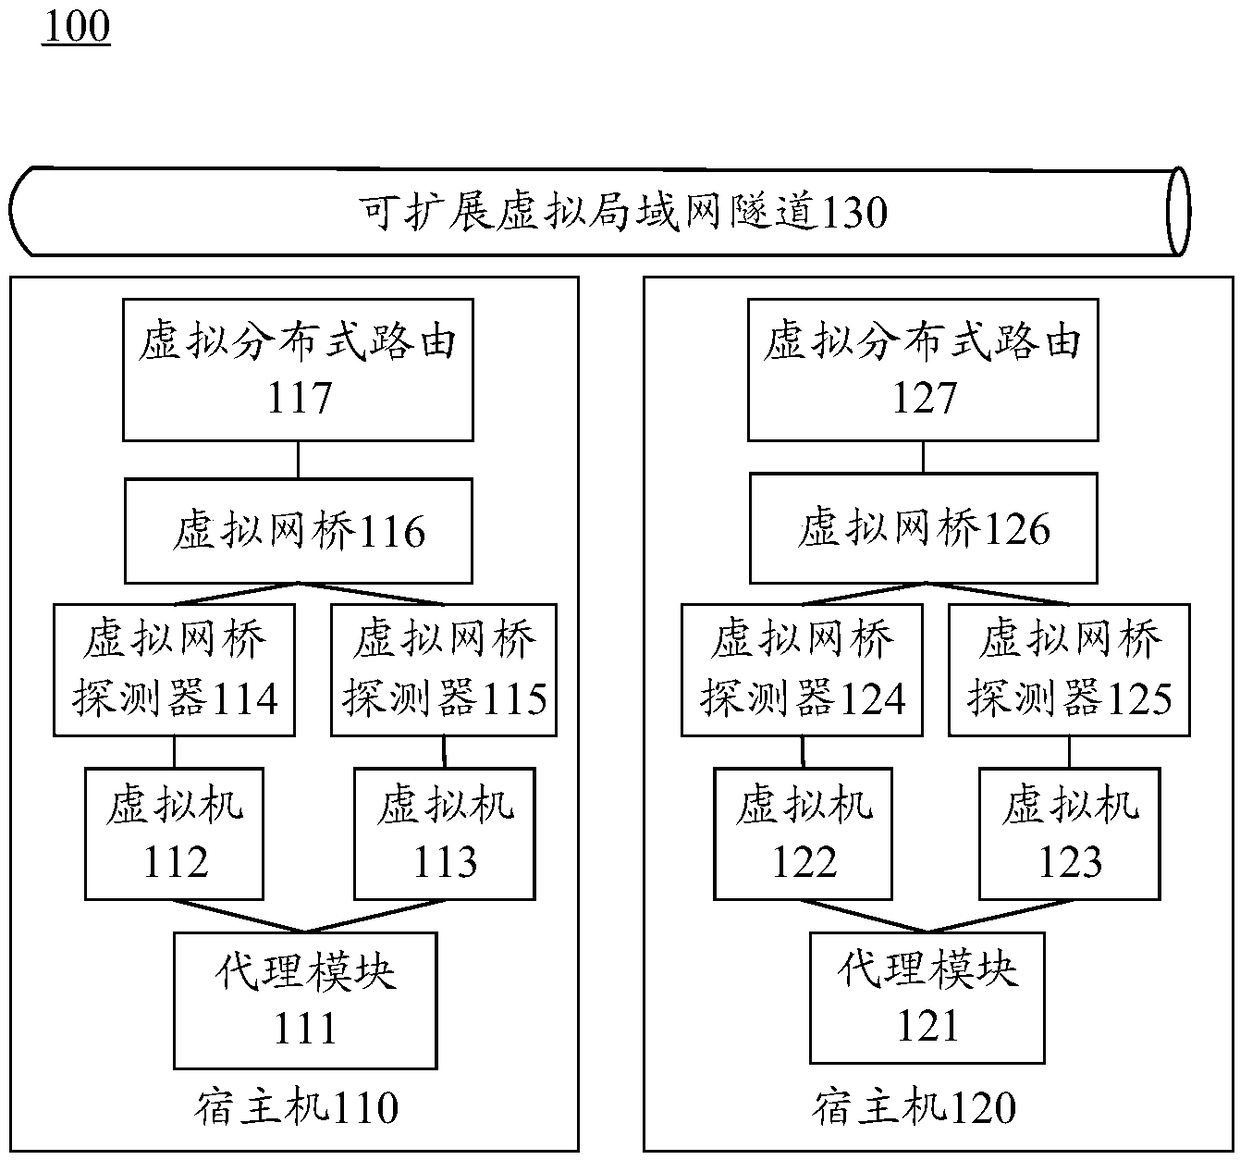 Network monitoring method and equipment